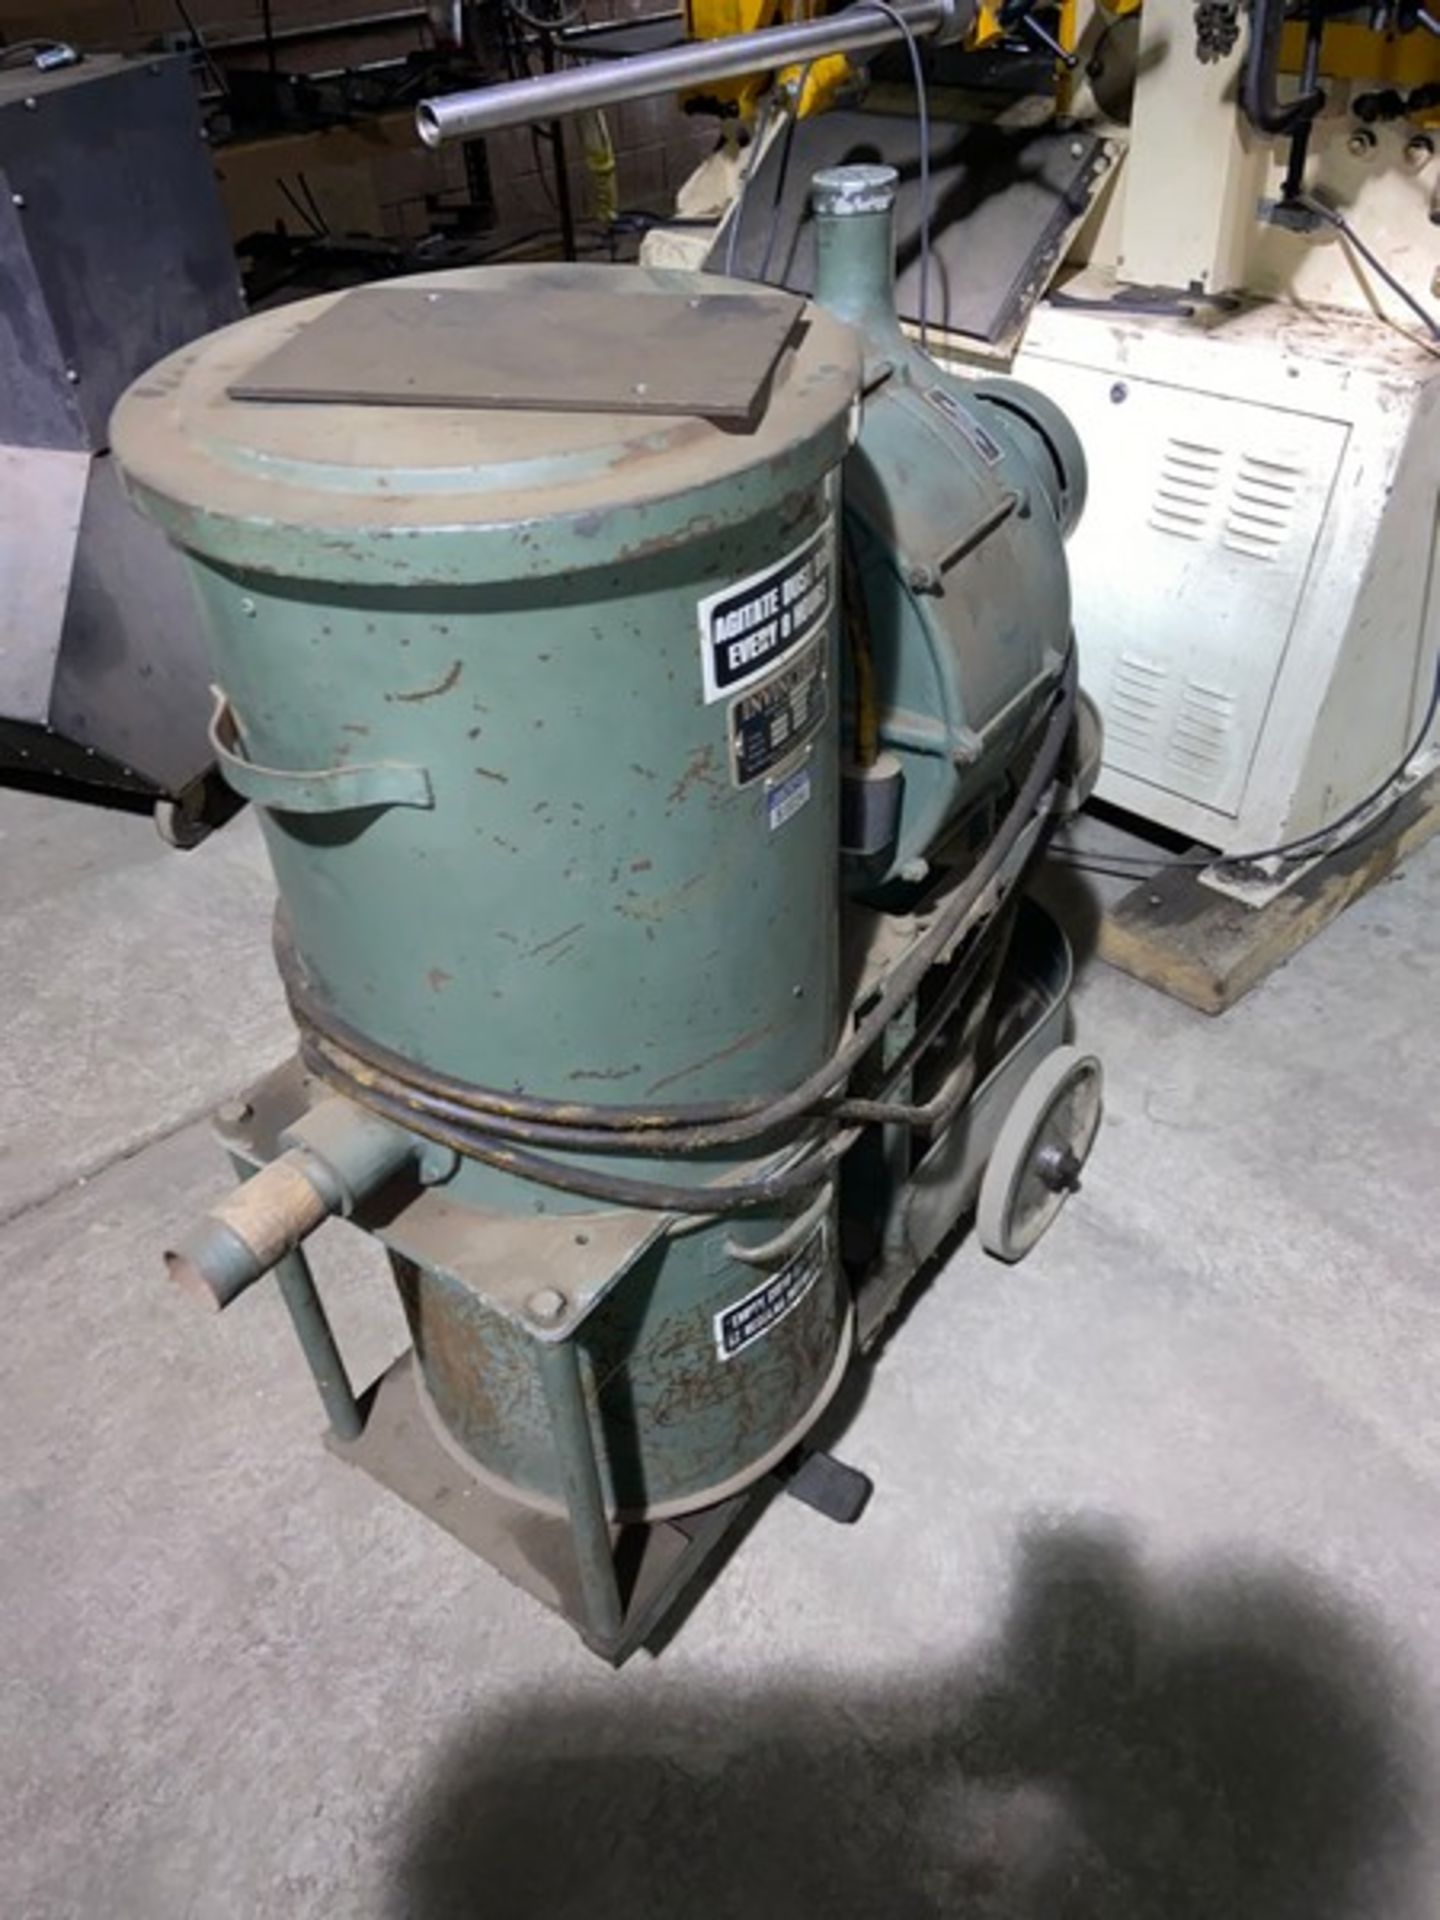 Invincible Portable Dust Collector, M/N 460, S/N 48K881, 460 Volts, 3 Phase (LOCATED IN CORRY, PA) - Image 2 of 4